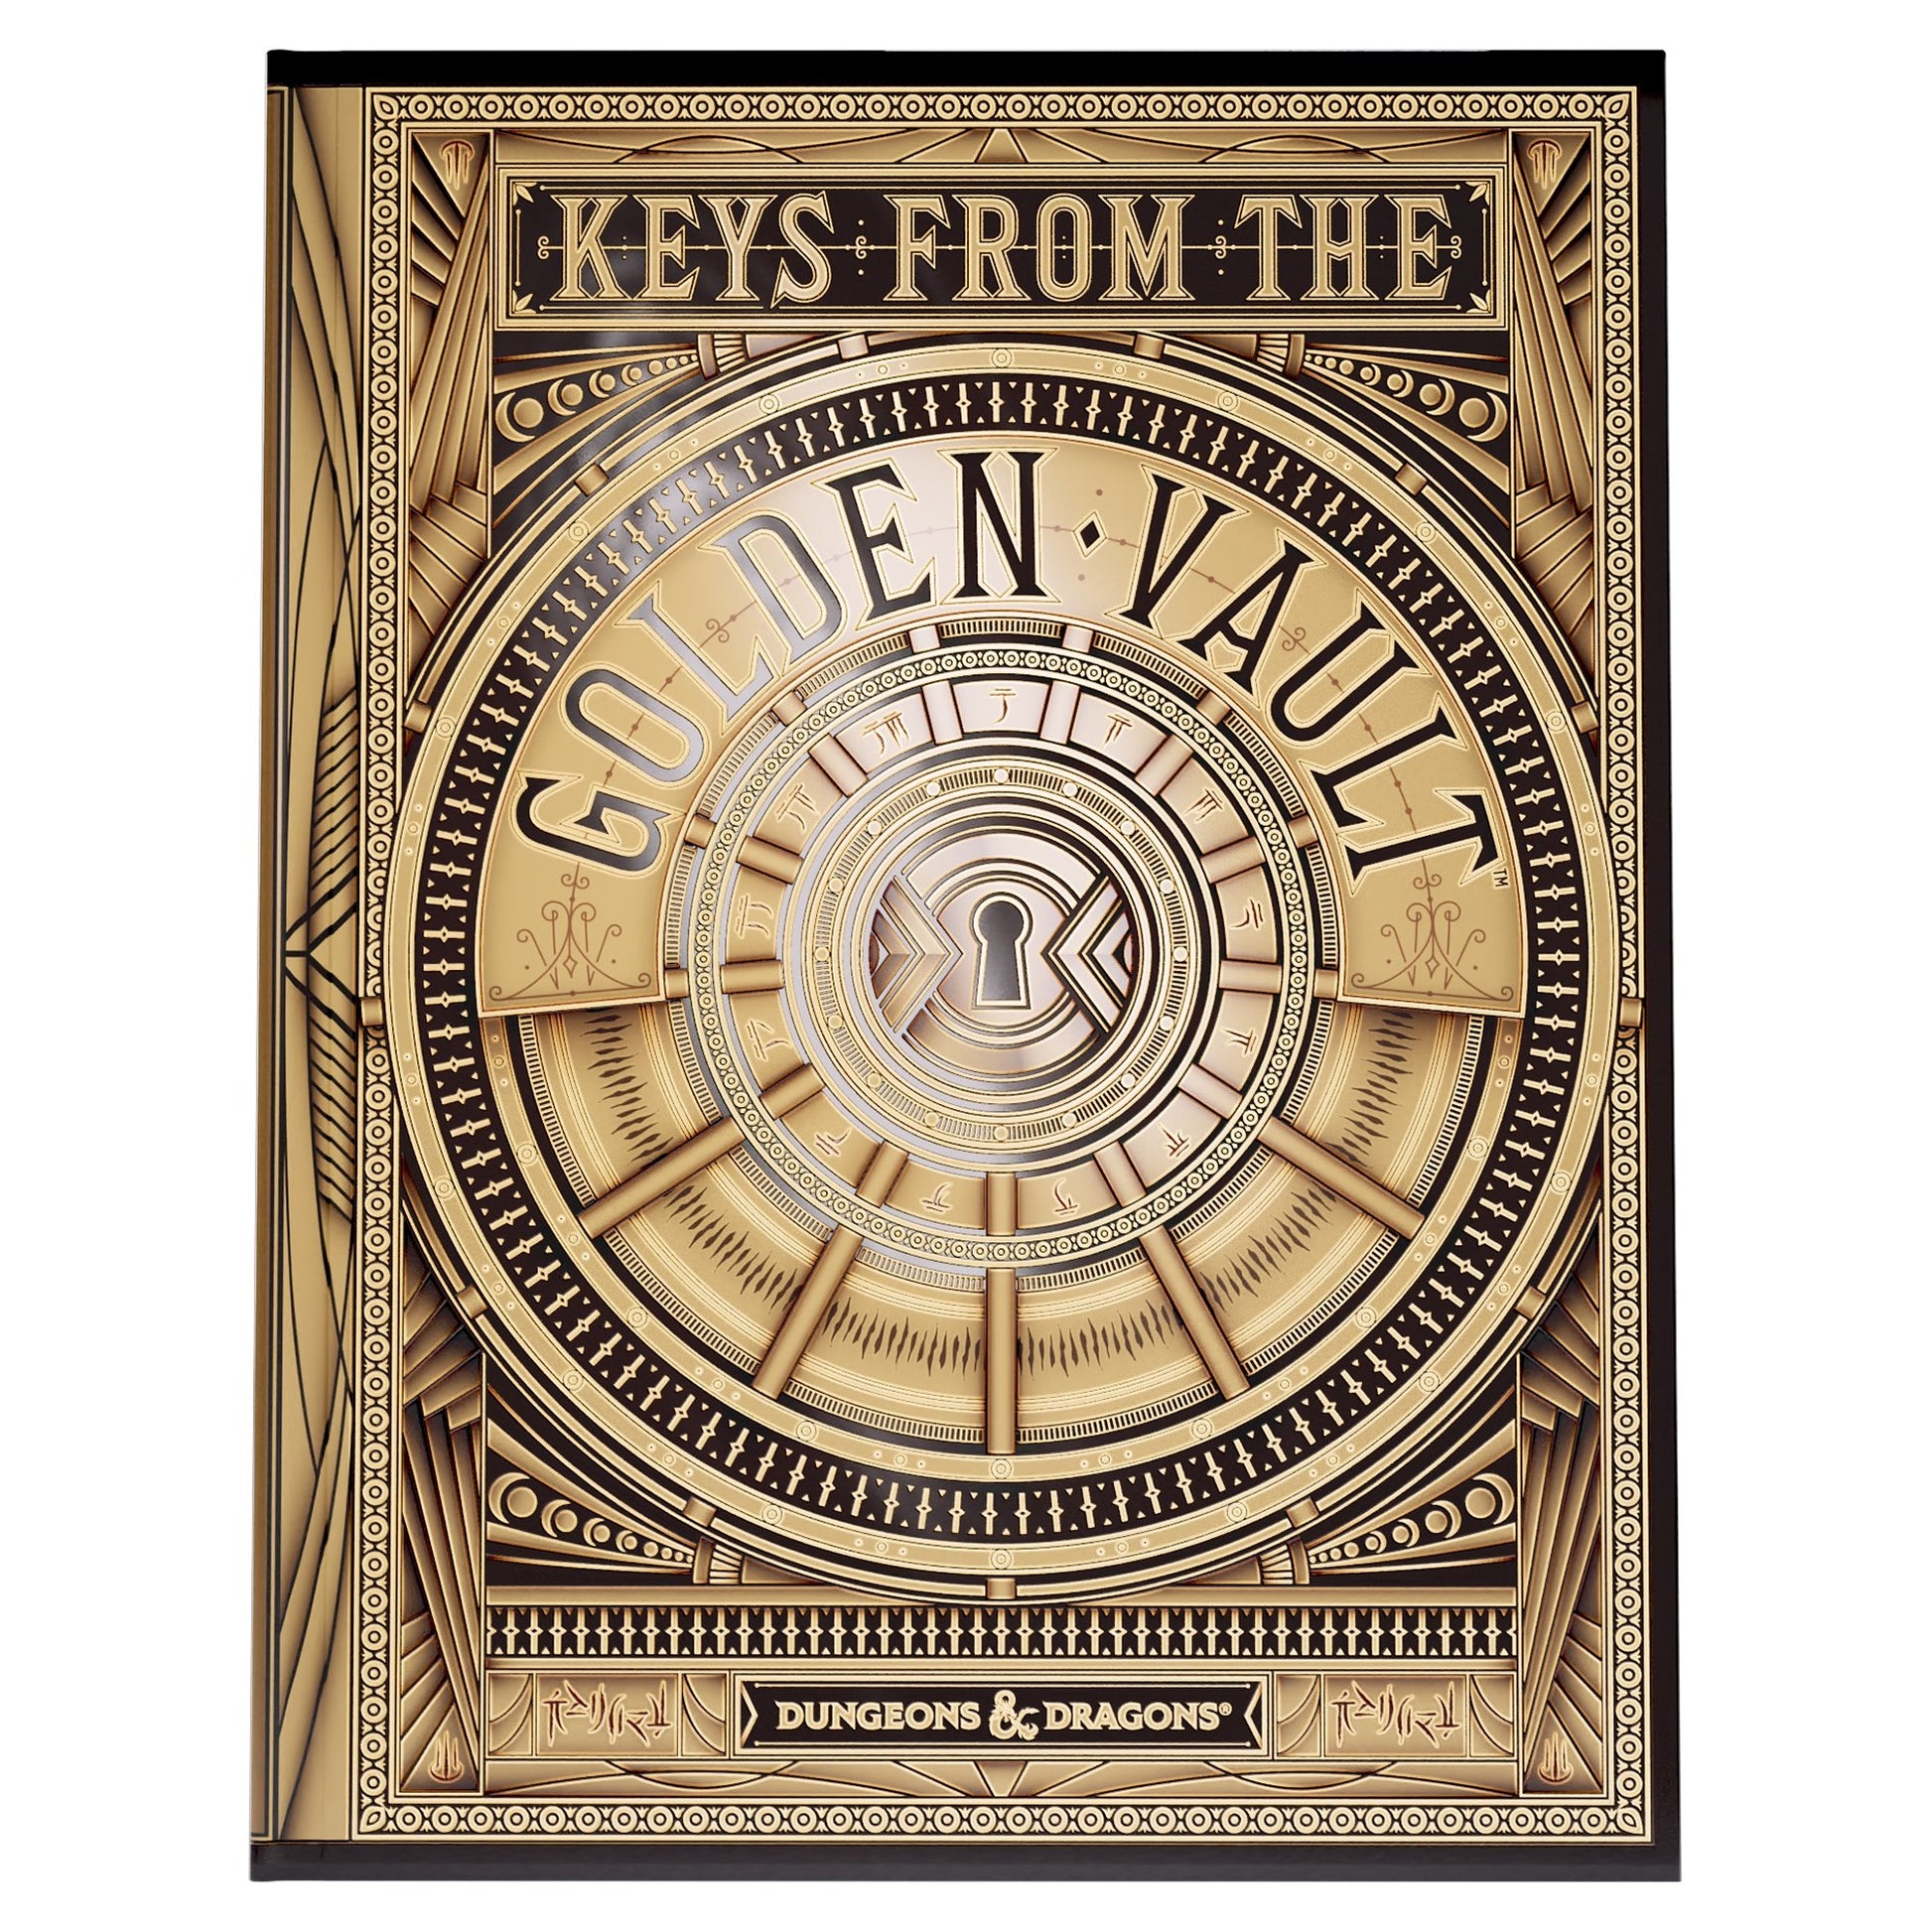 Dungeons & Dragons RPG: Keys From the Golden Vault Hard Cover from WIZARDS OF THE COAST, INC at The Compleat Strategist